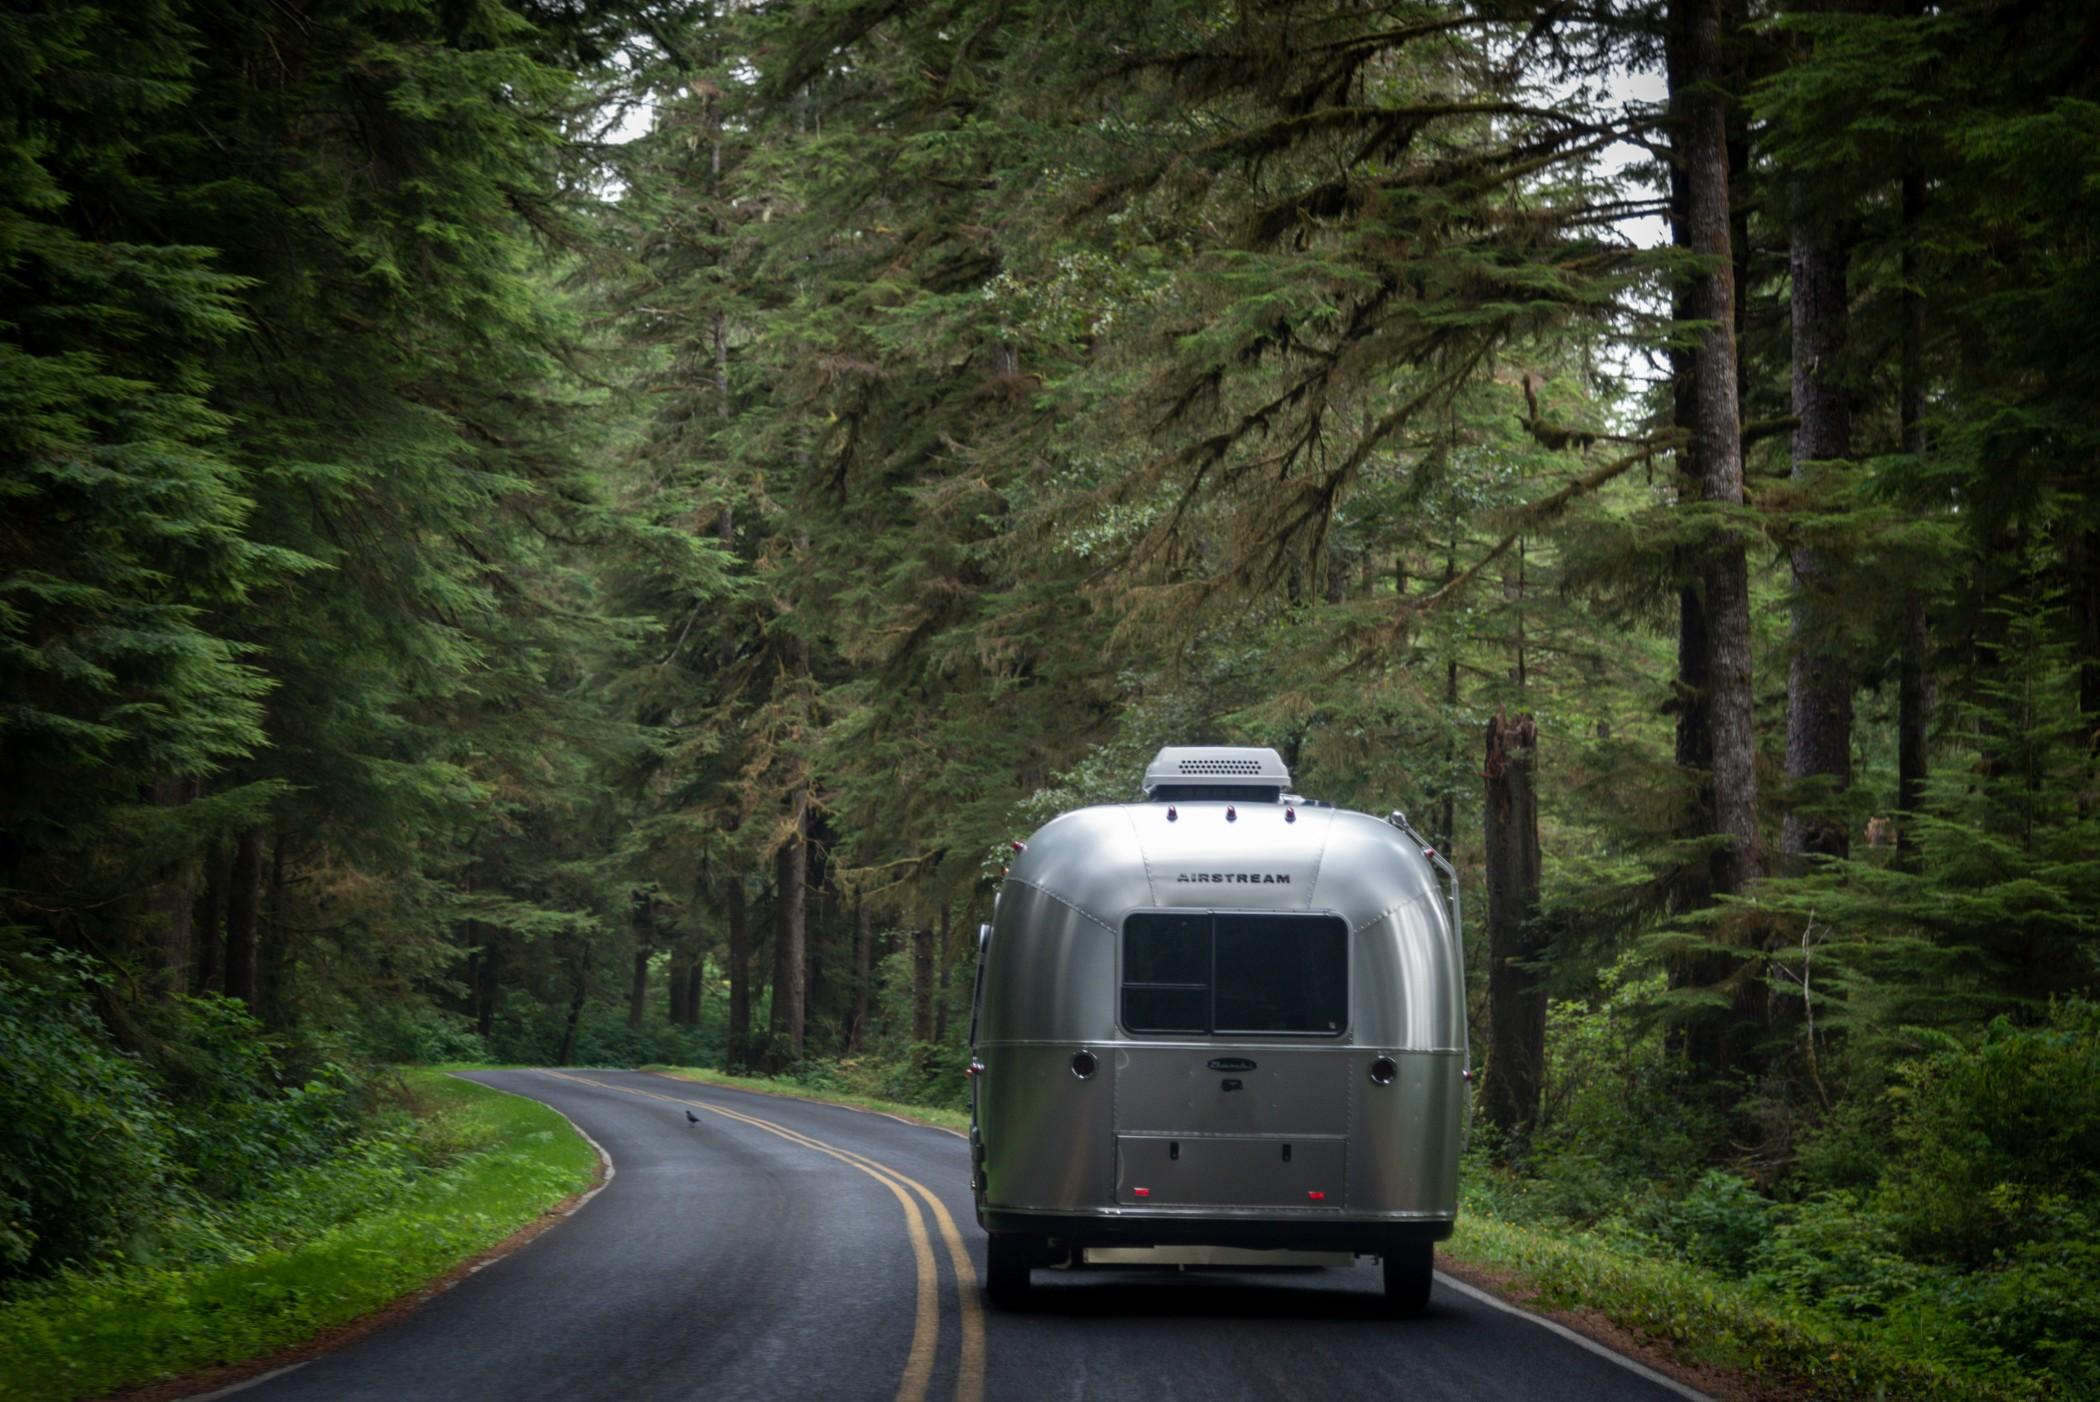 Airstream trailers like this one were already popular, but there’s a new one to look out for.